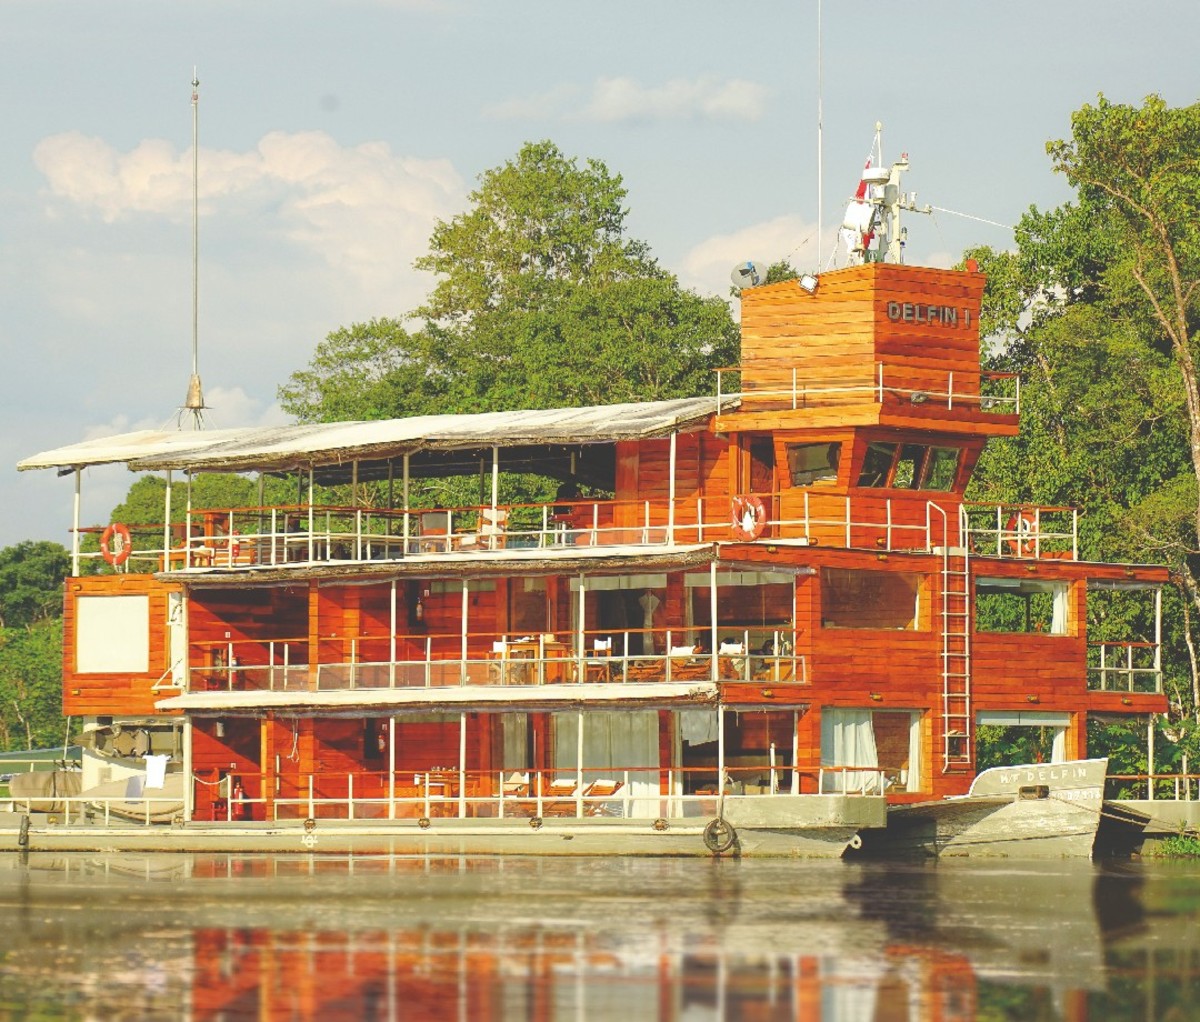 Wooden cruise ship on Amazon River